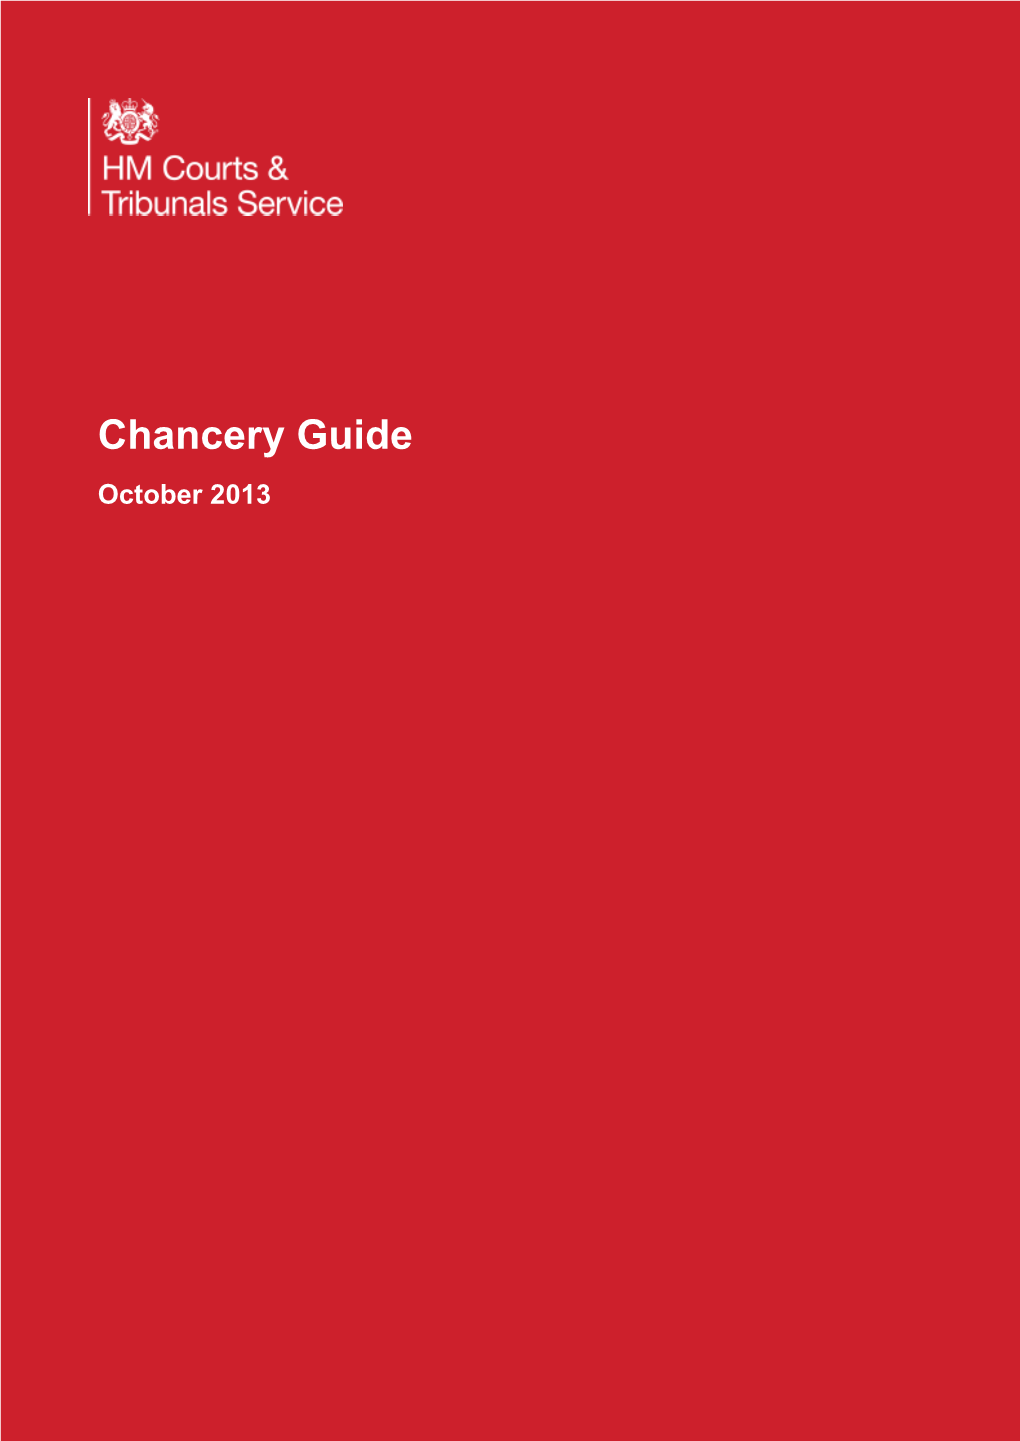 Chancery Guide October 2013